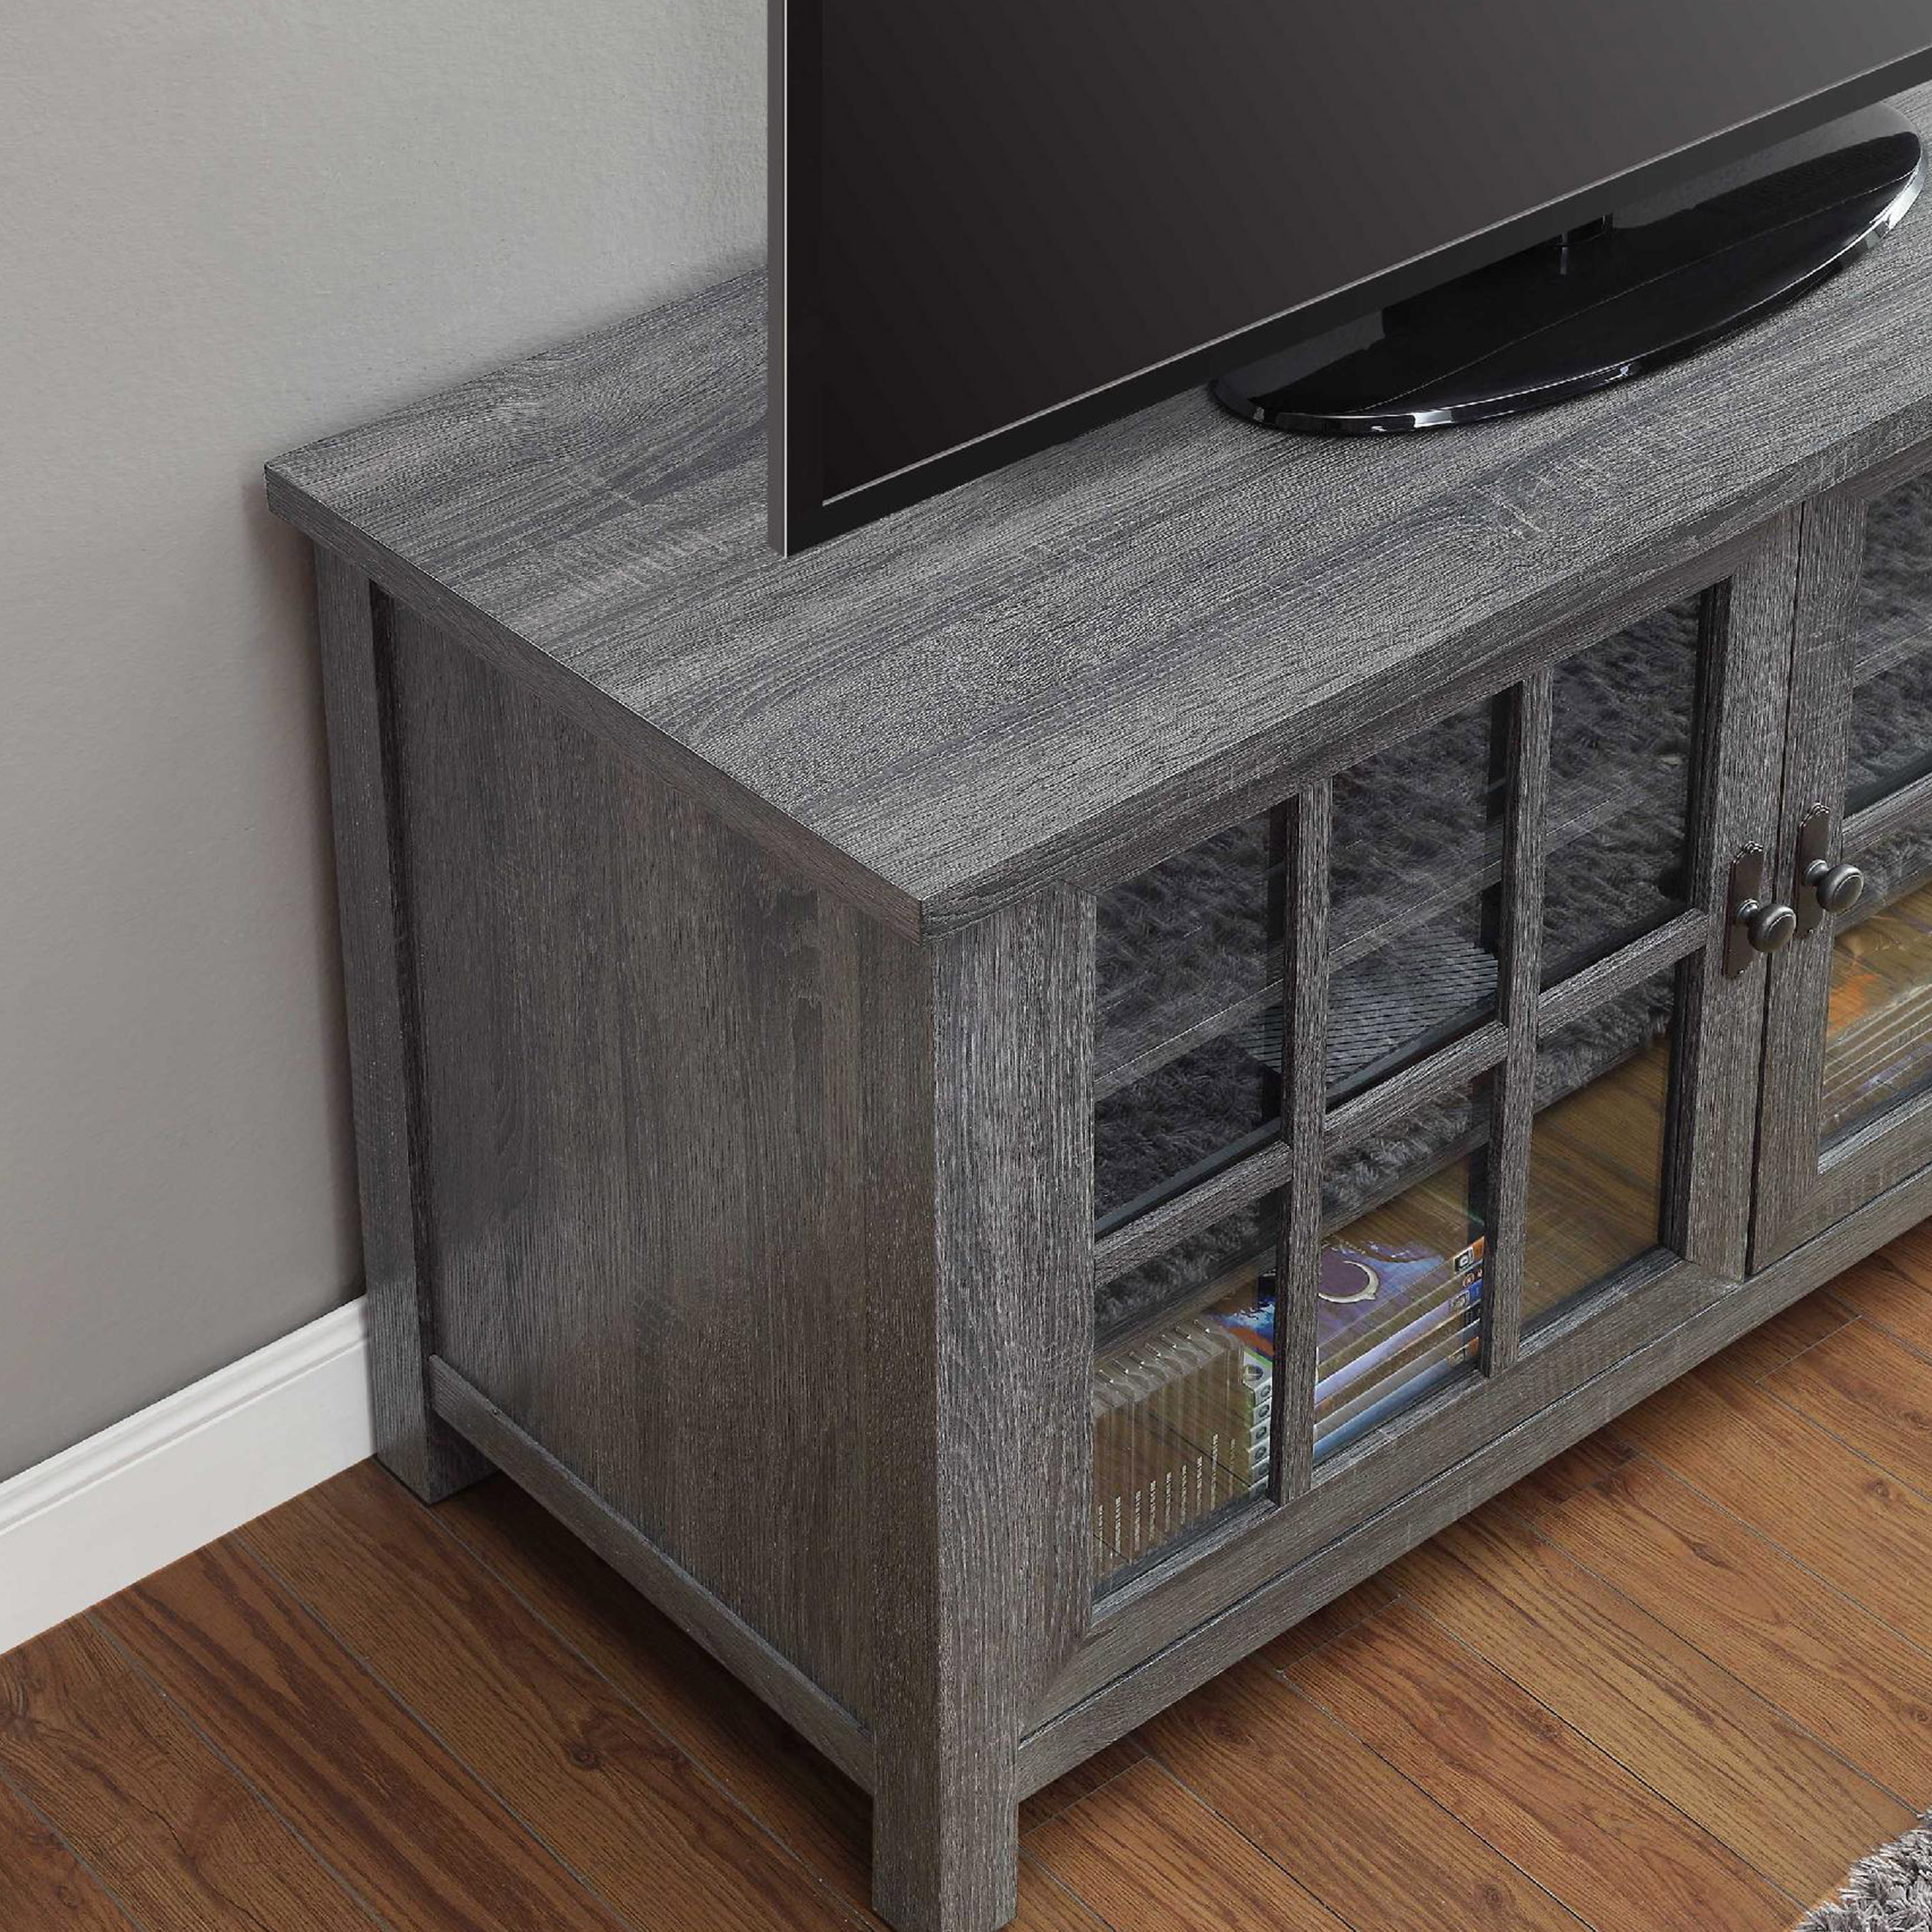 Better Homes & Gardens Oxford Square TV Stand for TVs up to 55", Gray - image 4 of 8